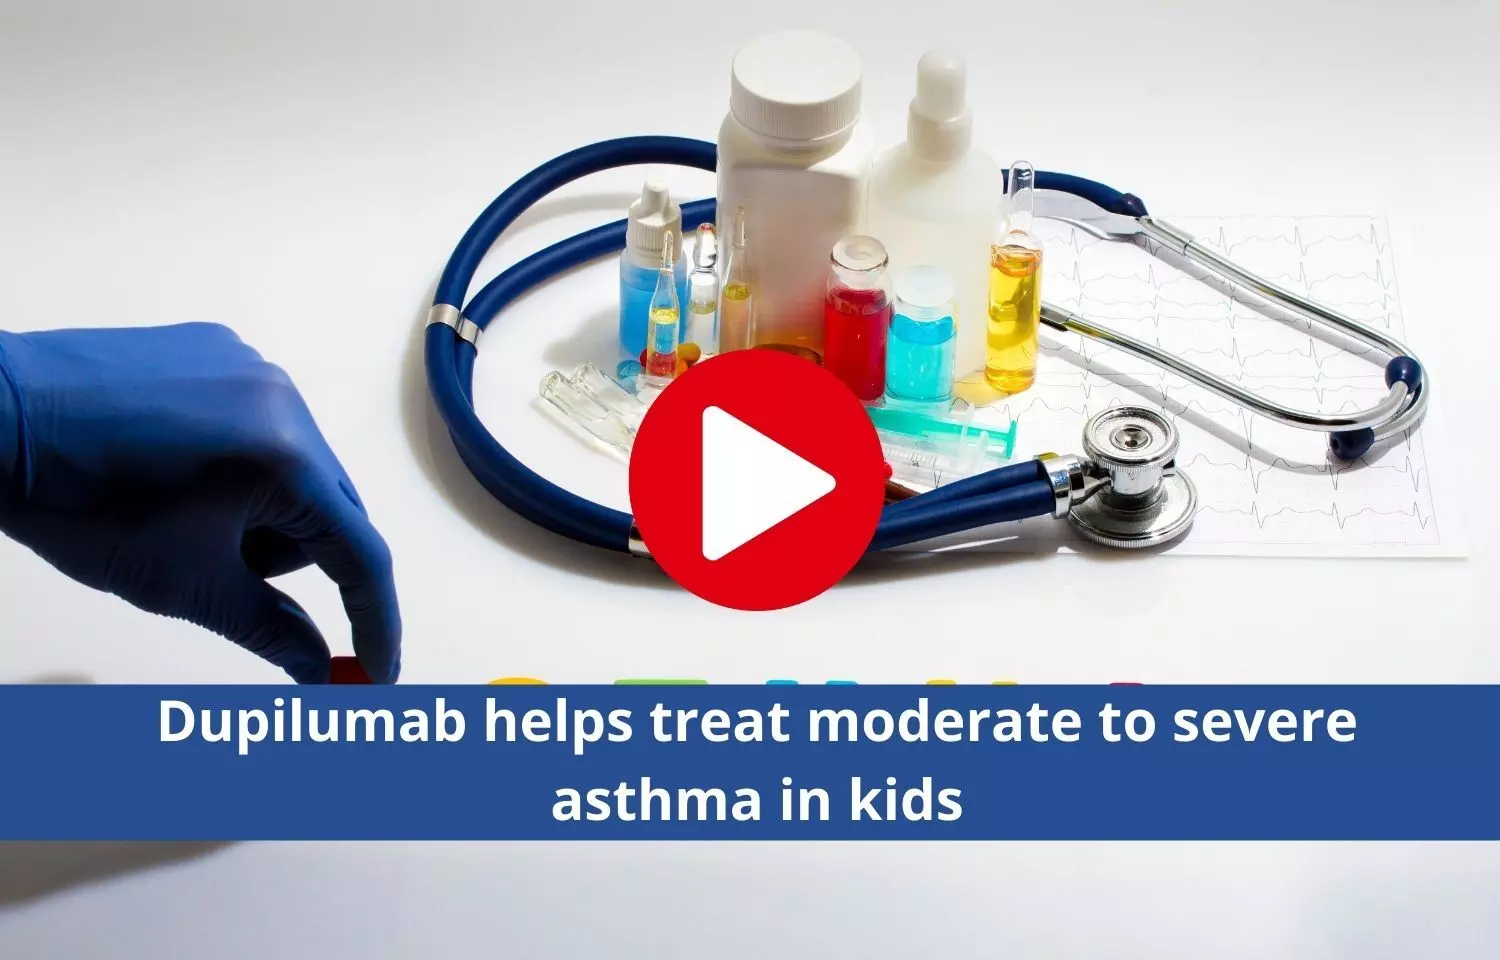 Dupilumab helps treat moderate to severe asthma in kids